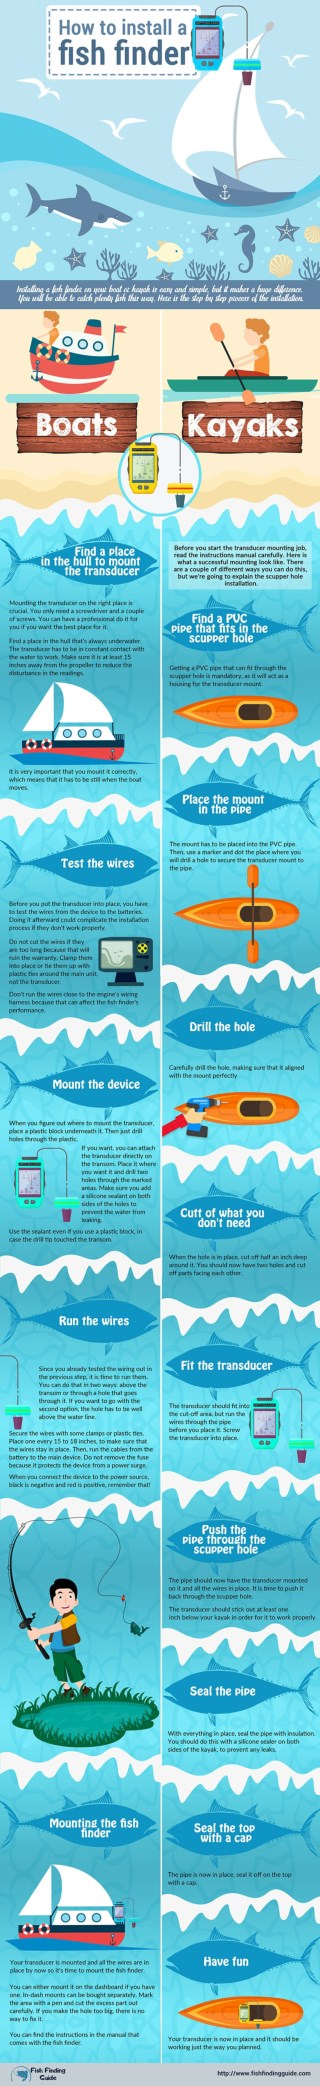 How to Install a Fishfinder?